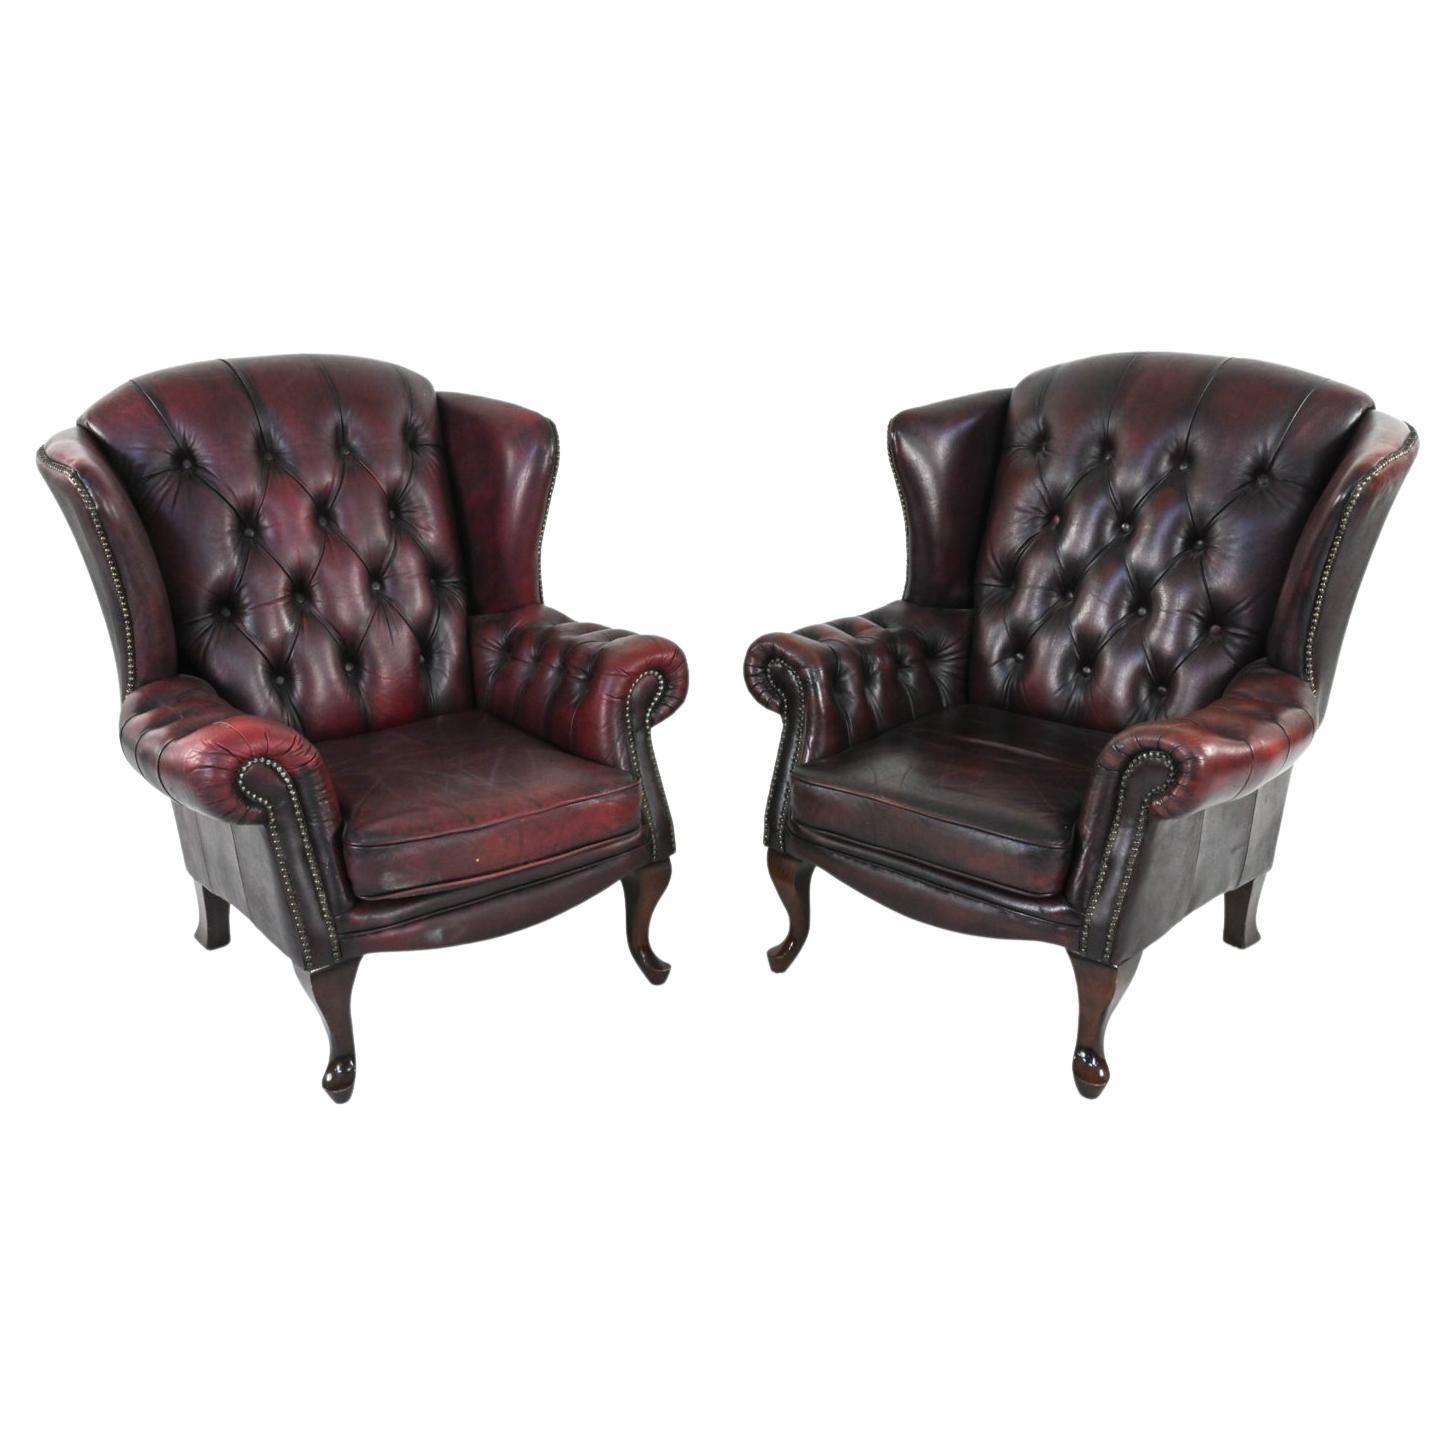 Pair of Chesterfield-Style Tufted Leather Wingback Lounge Chairs